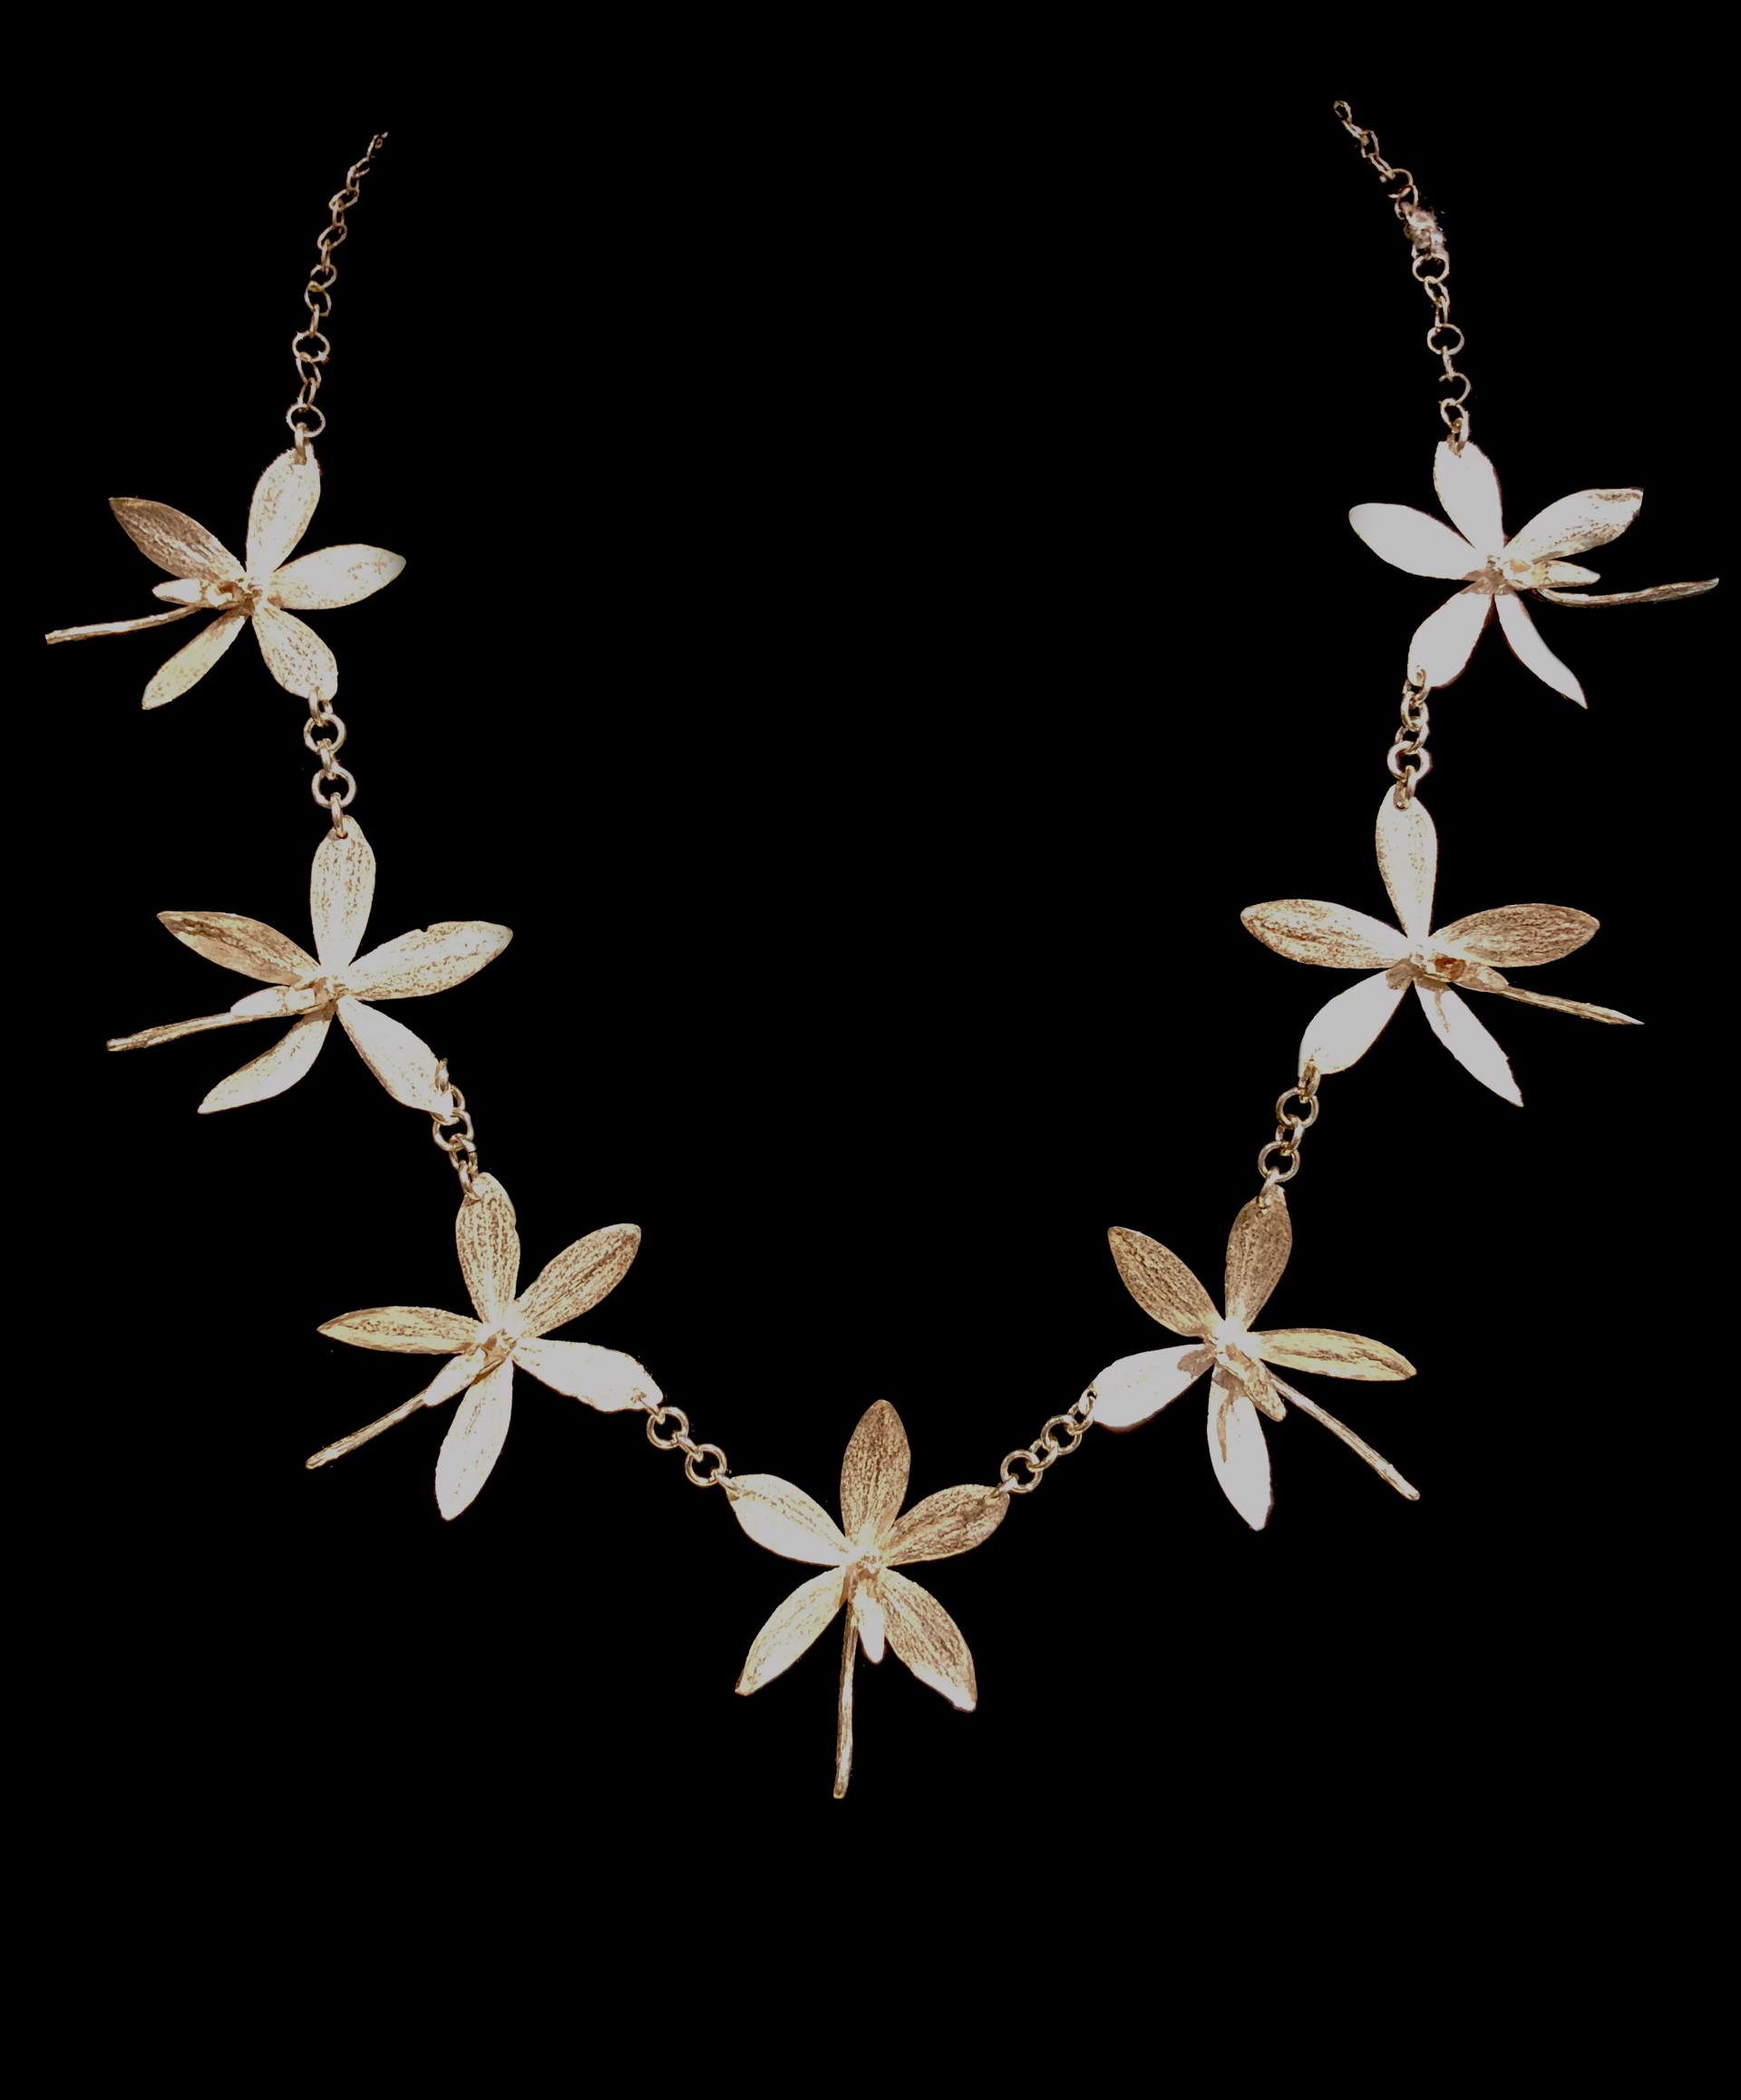 Seven Med Orchid Necklace by Wayne Keeth